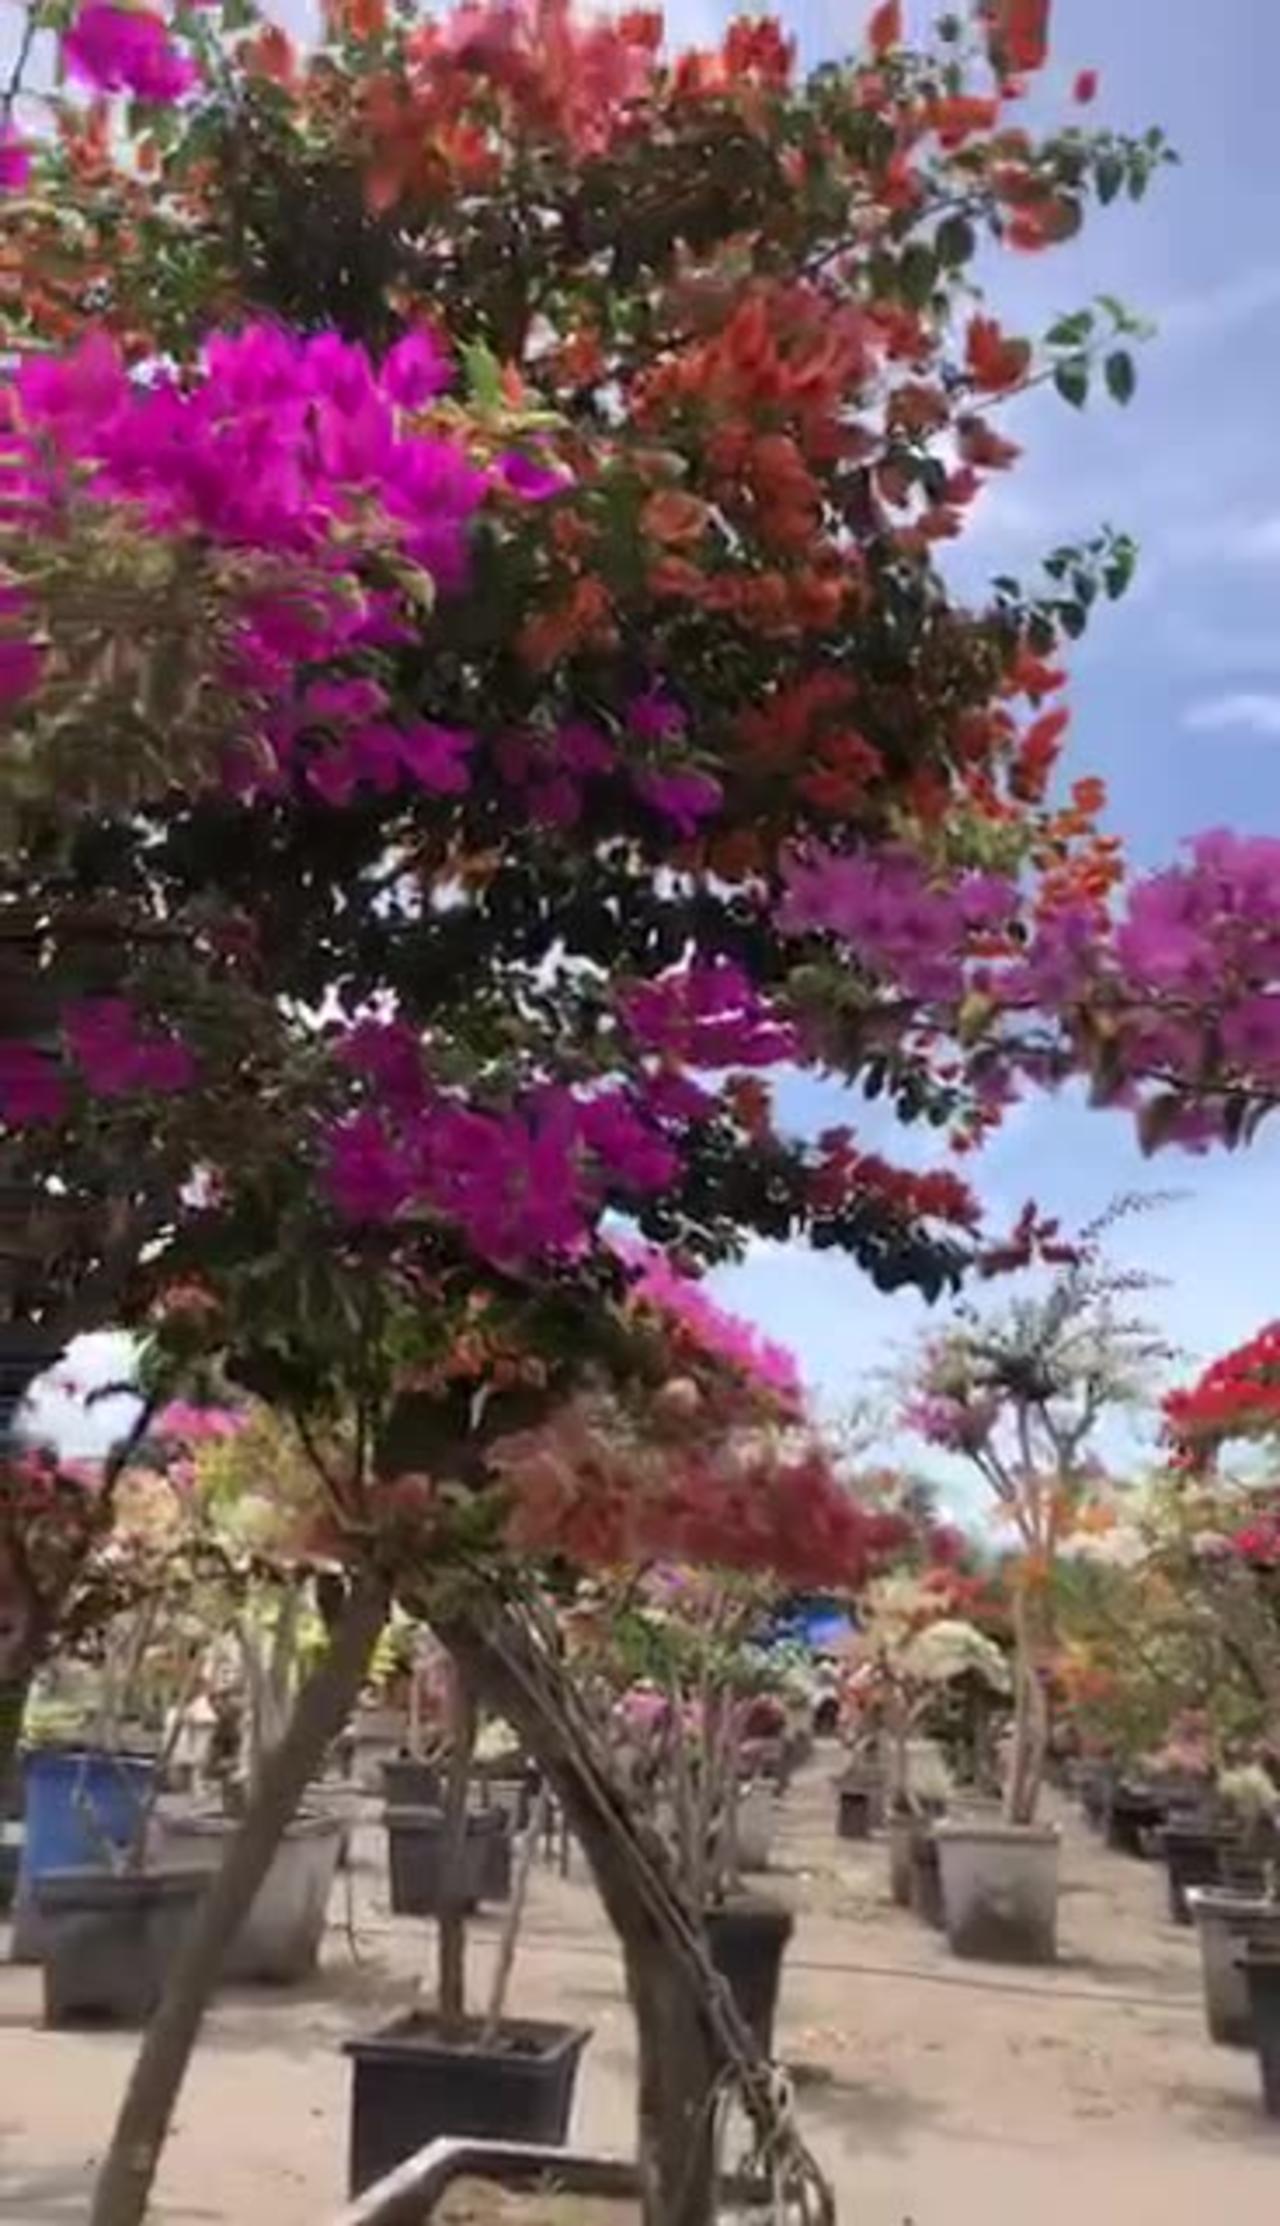 "Bougainvillea Beauty: Nature's Color Explosion in Full Bloom!"